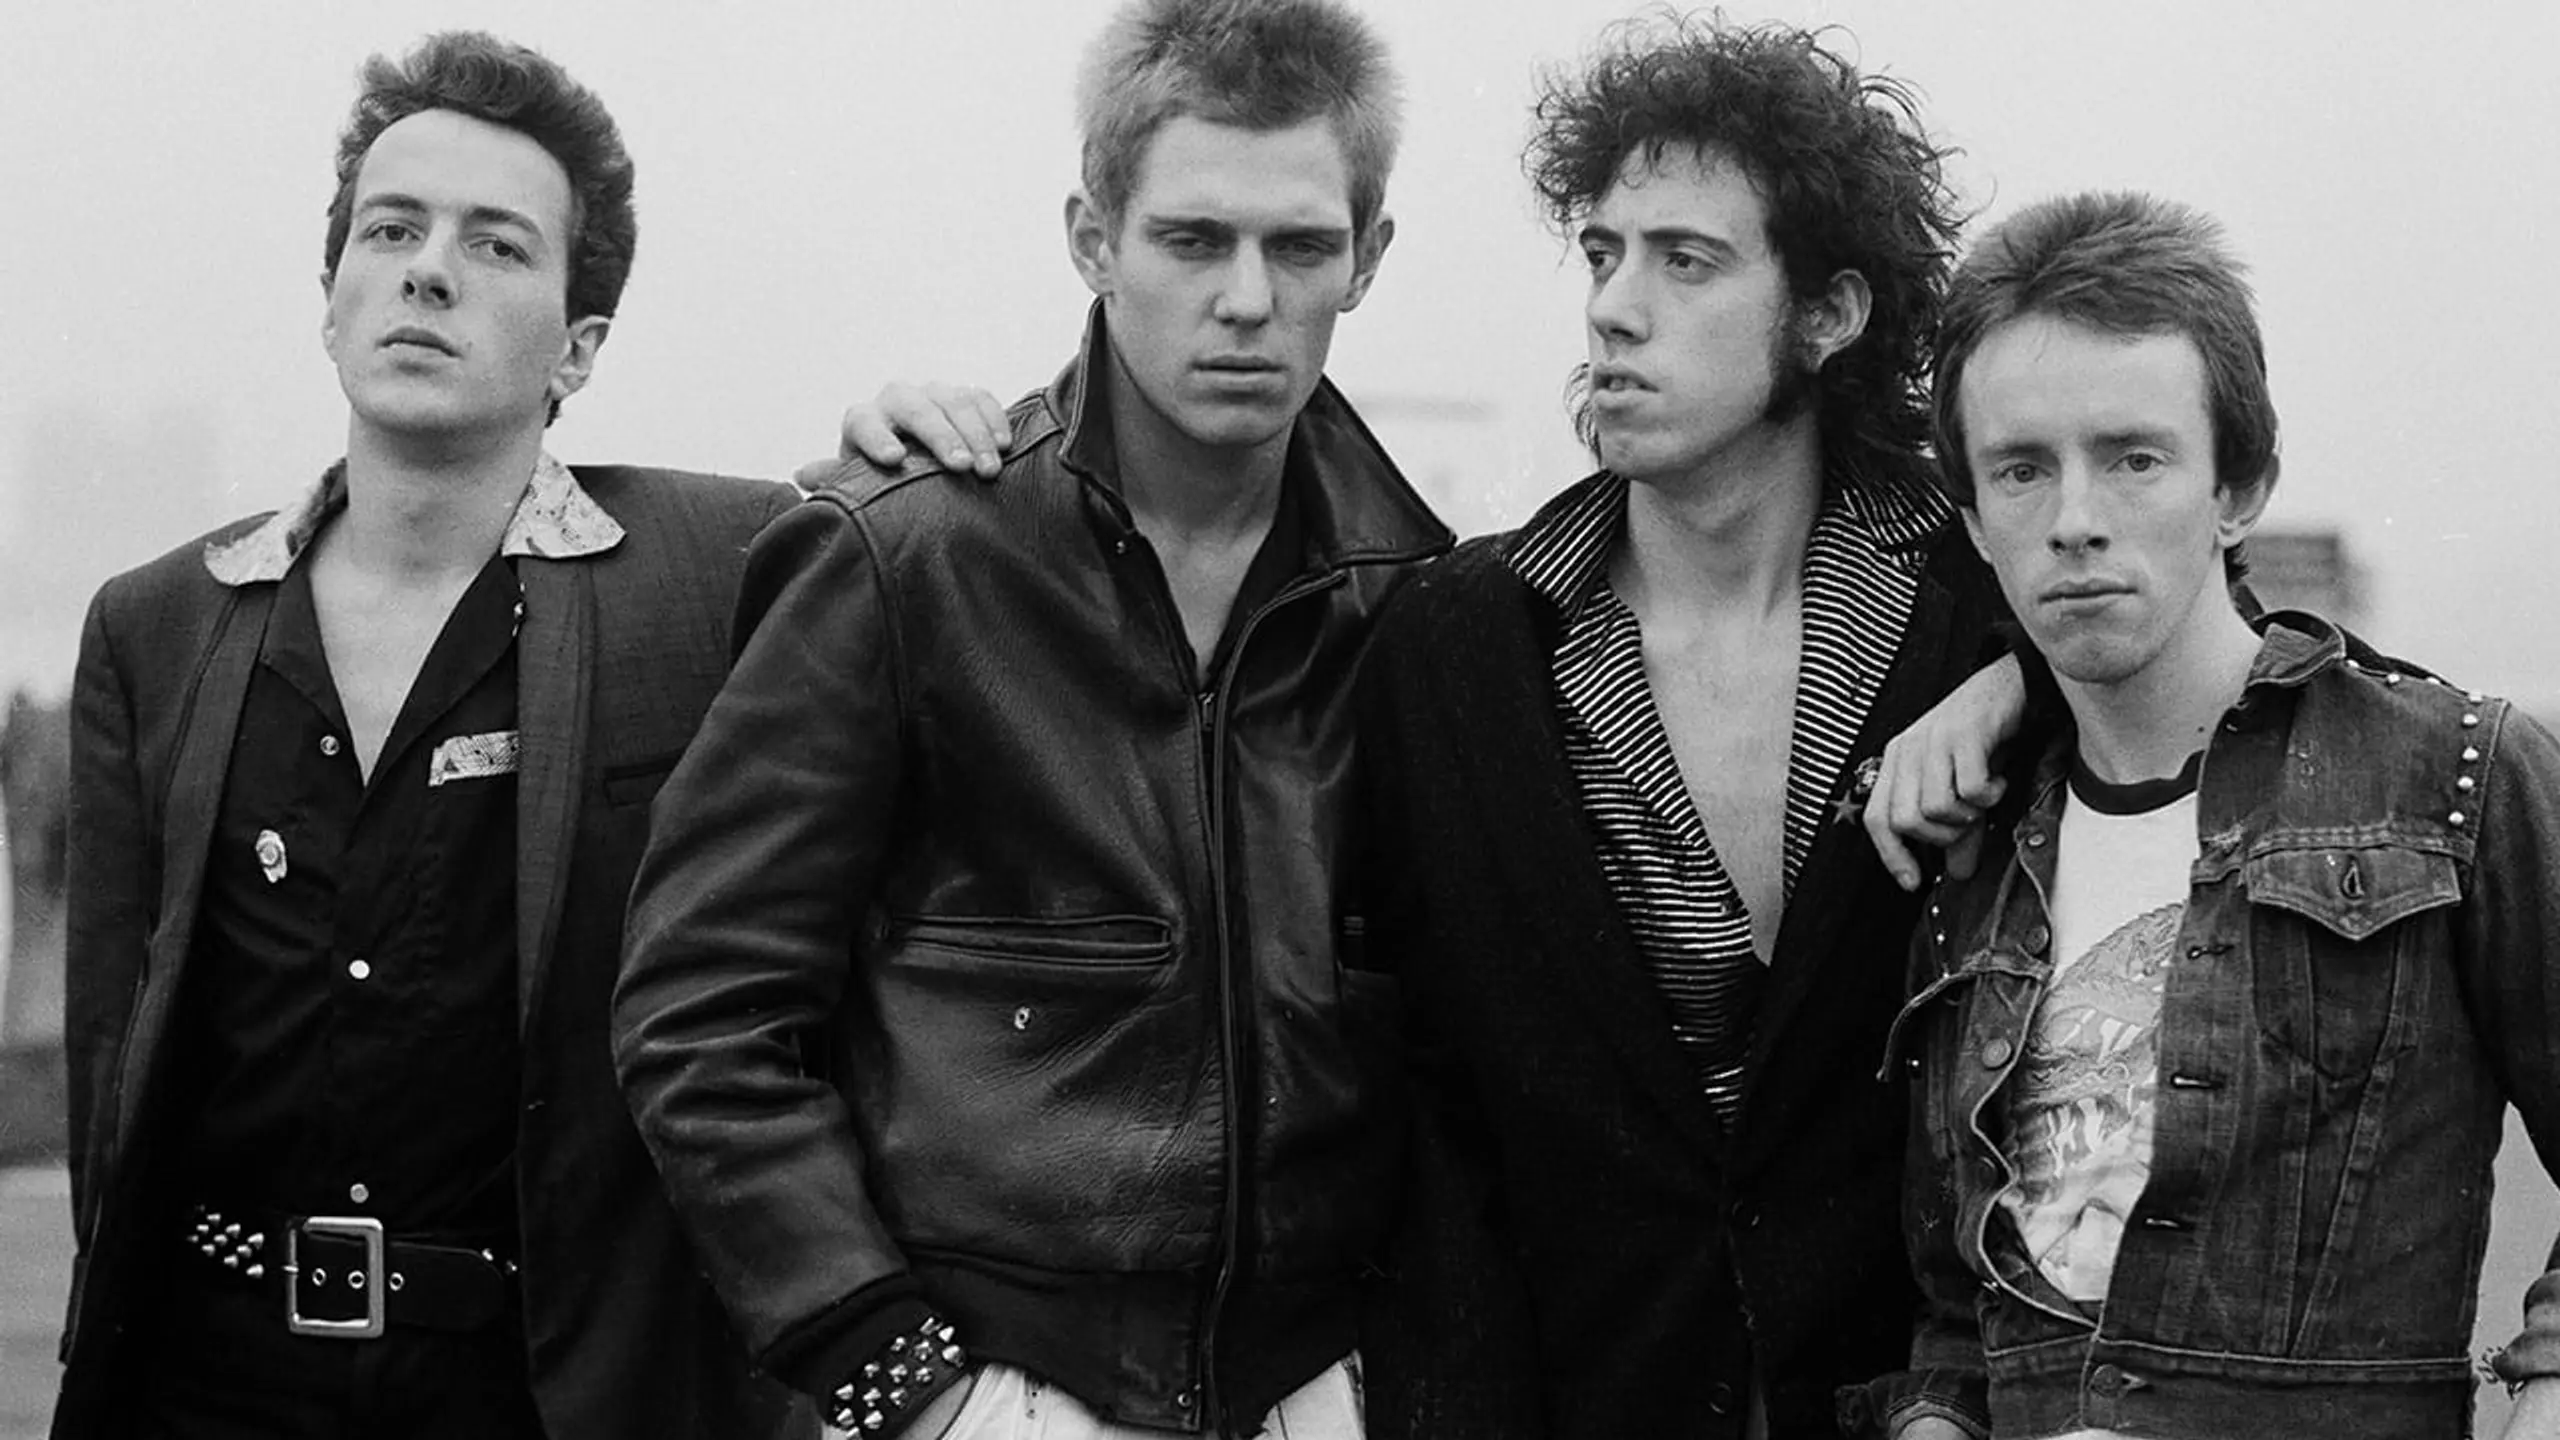 The Clash: Westway To The World